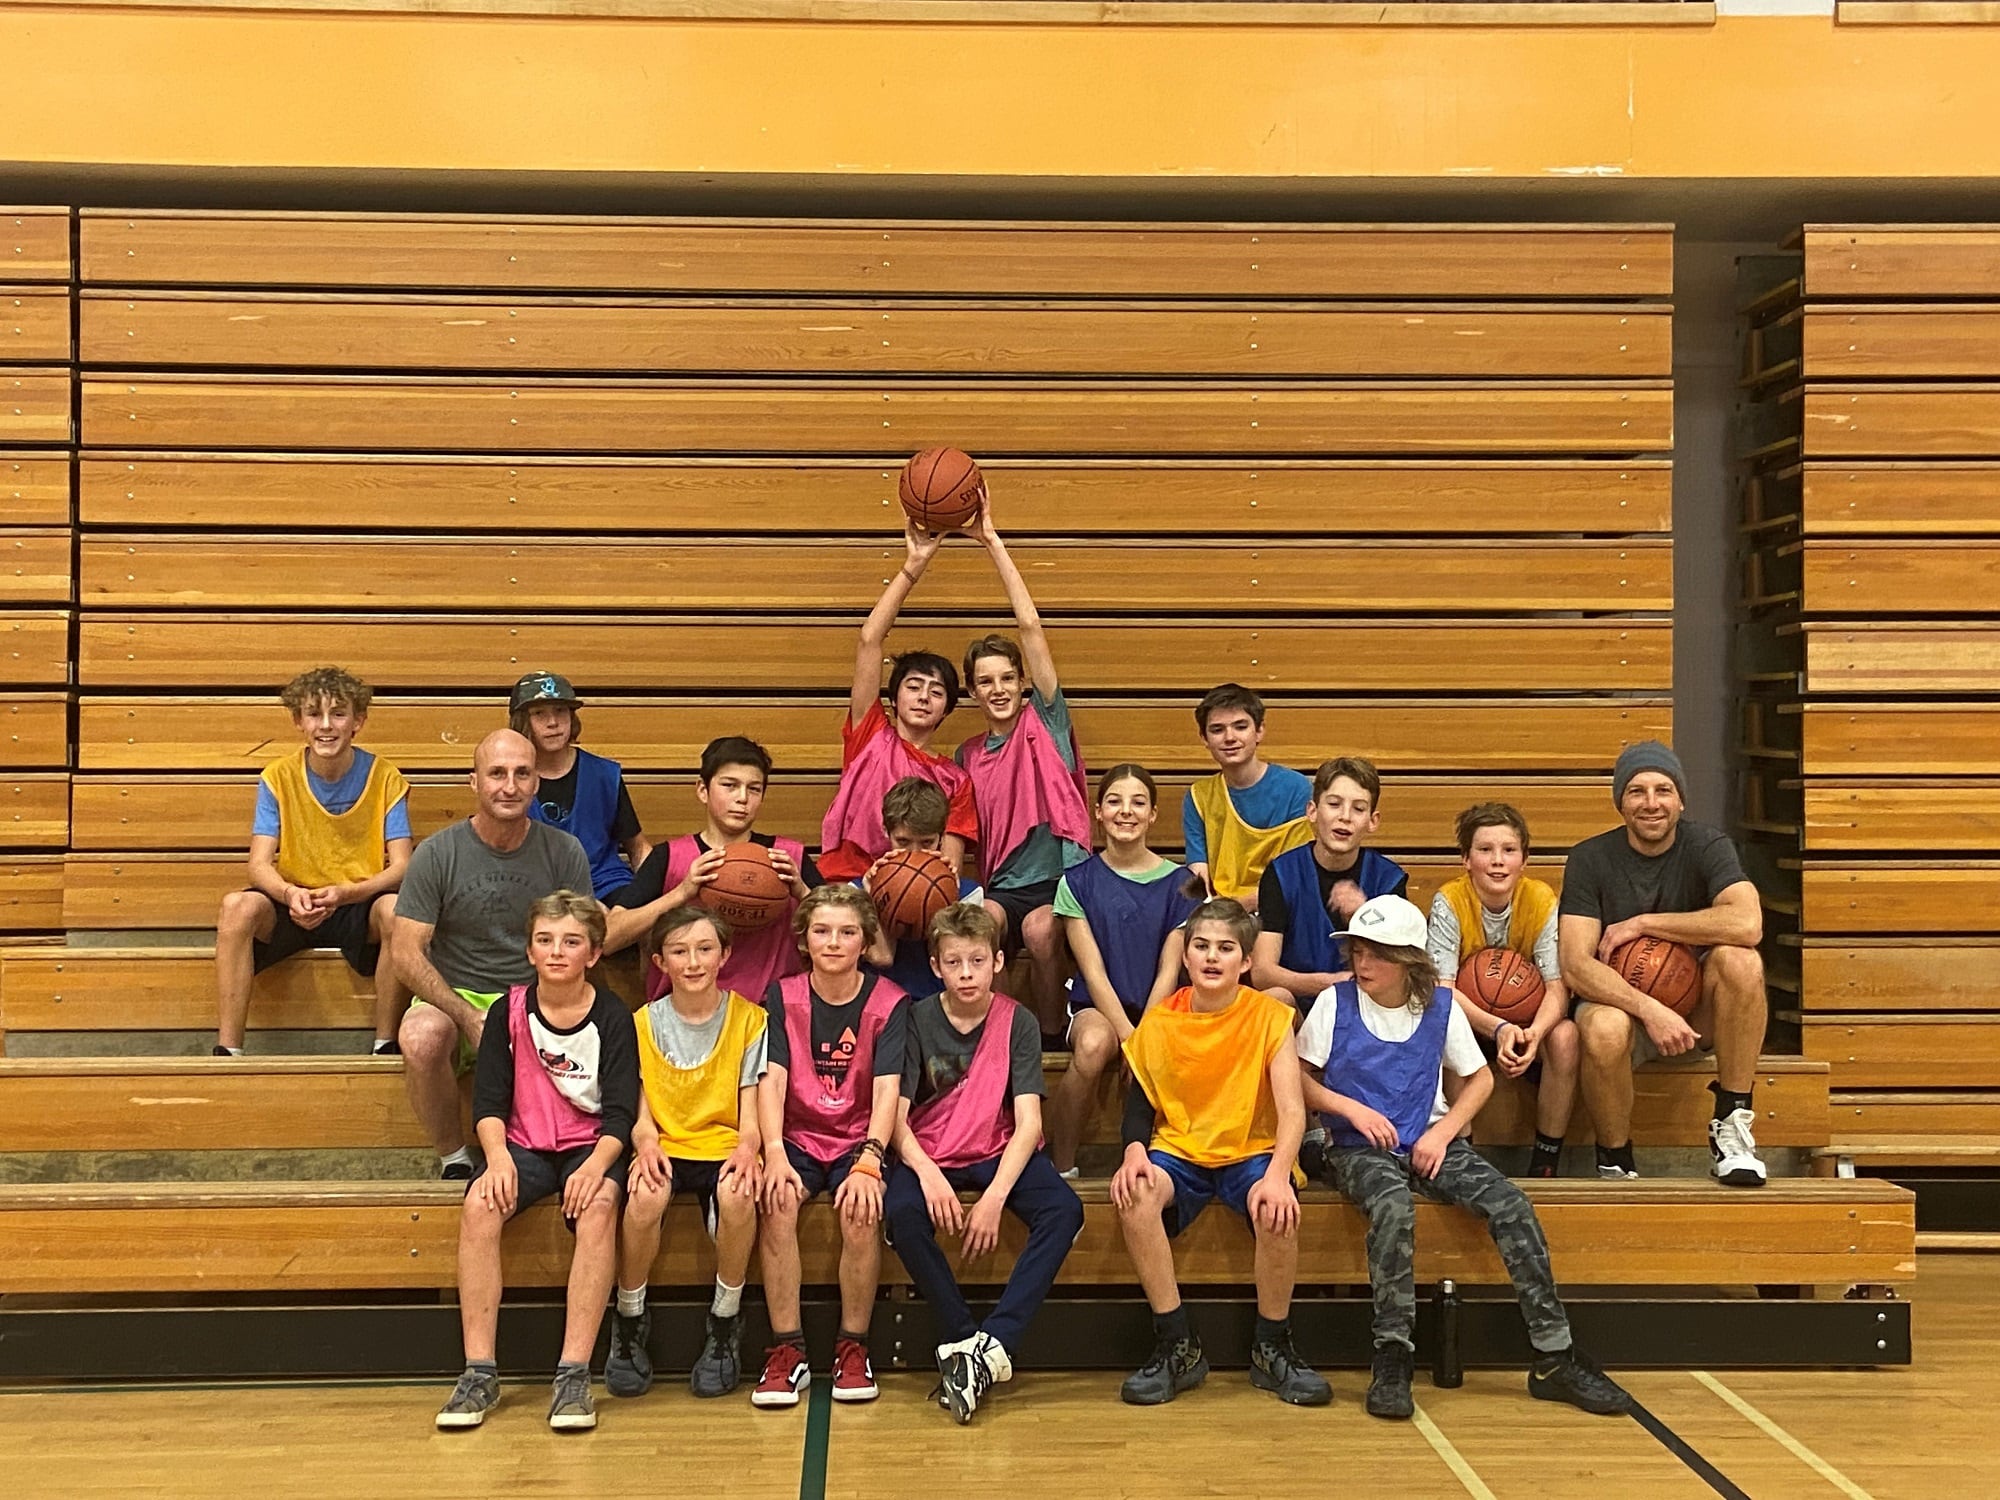 STUDENT REPORT: Slam Dunk For Teens After School In Rossland